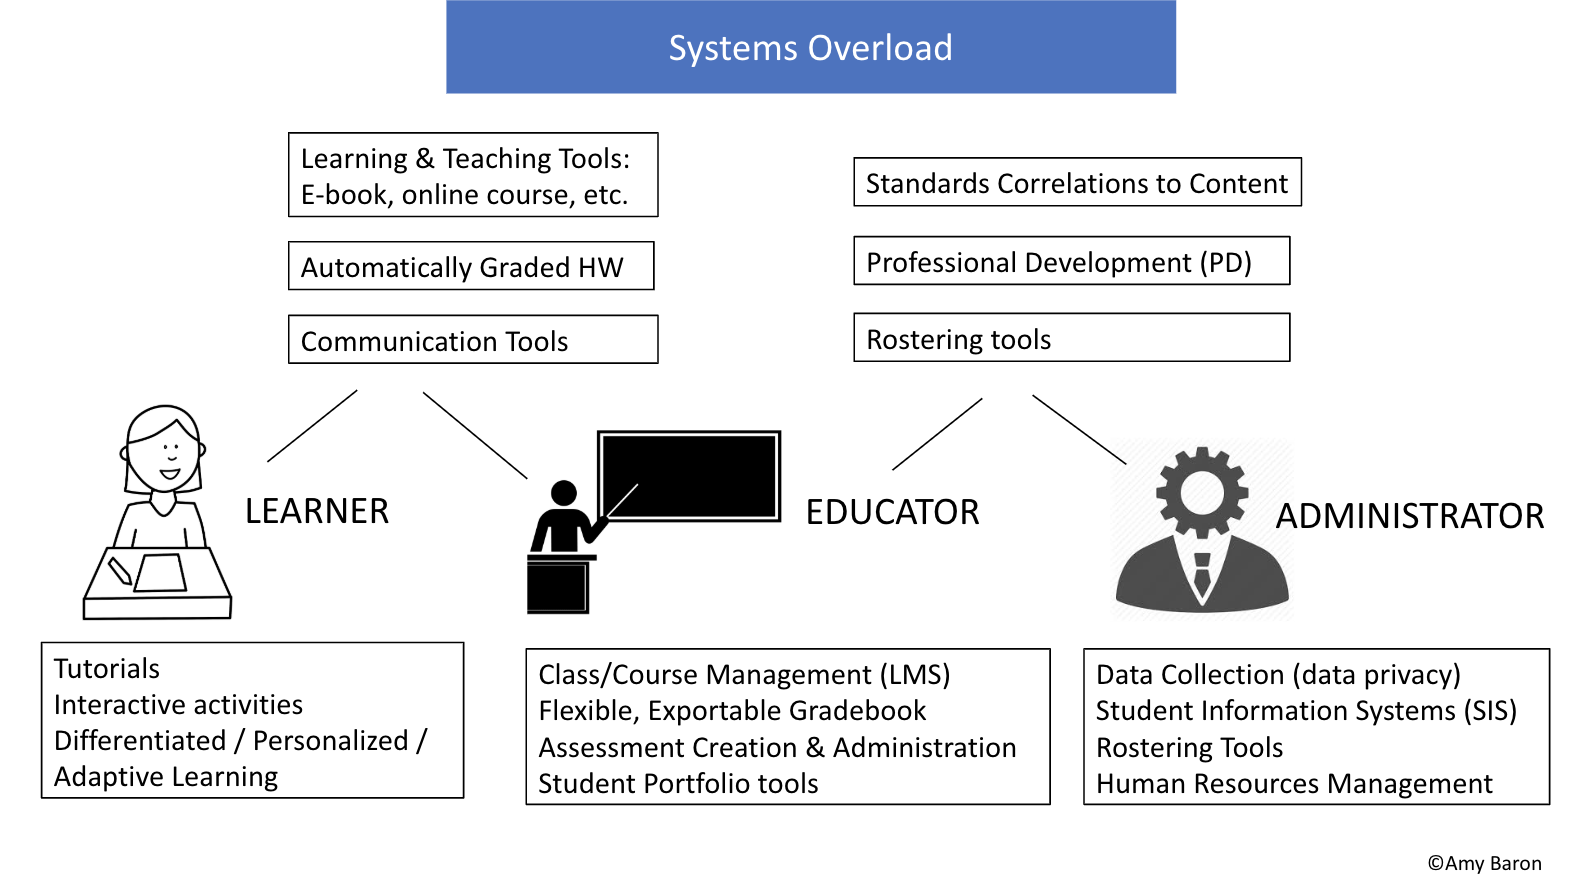 How the Learner (cartoon person seated at desk which has a paper and pencil on it), Educator (stick-figure behind podium pointing at blackboard) and Administrator (cog for head on business suit torso) connect through interoperability.